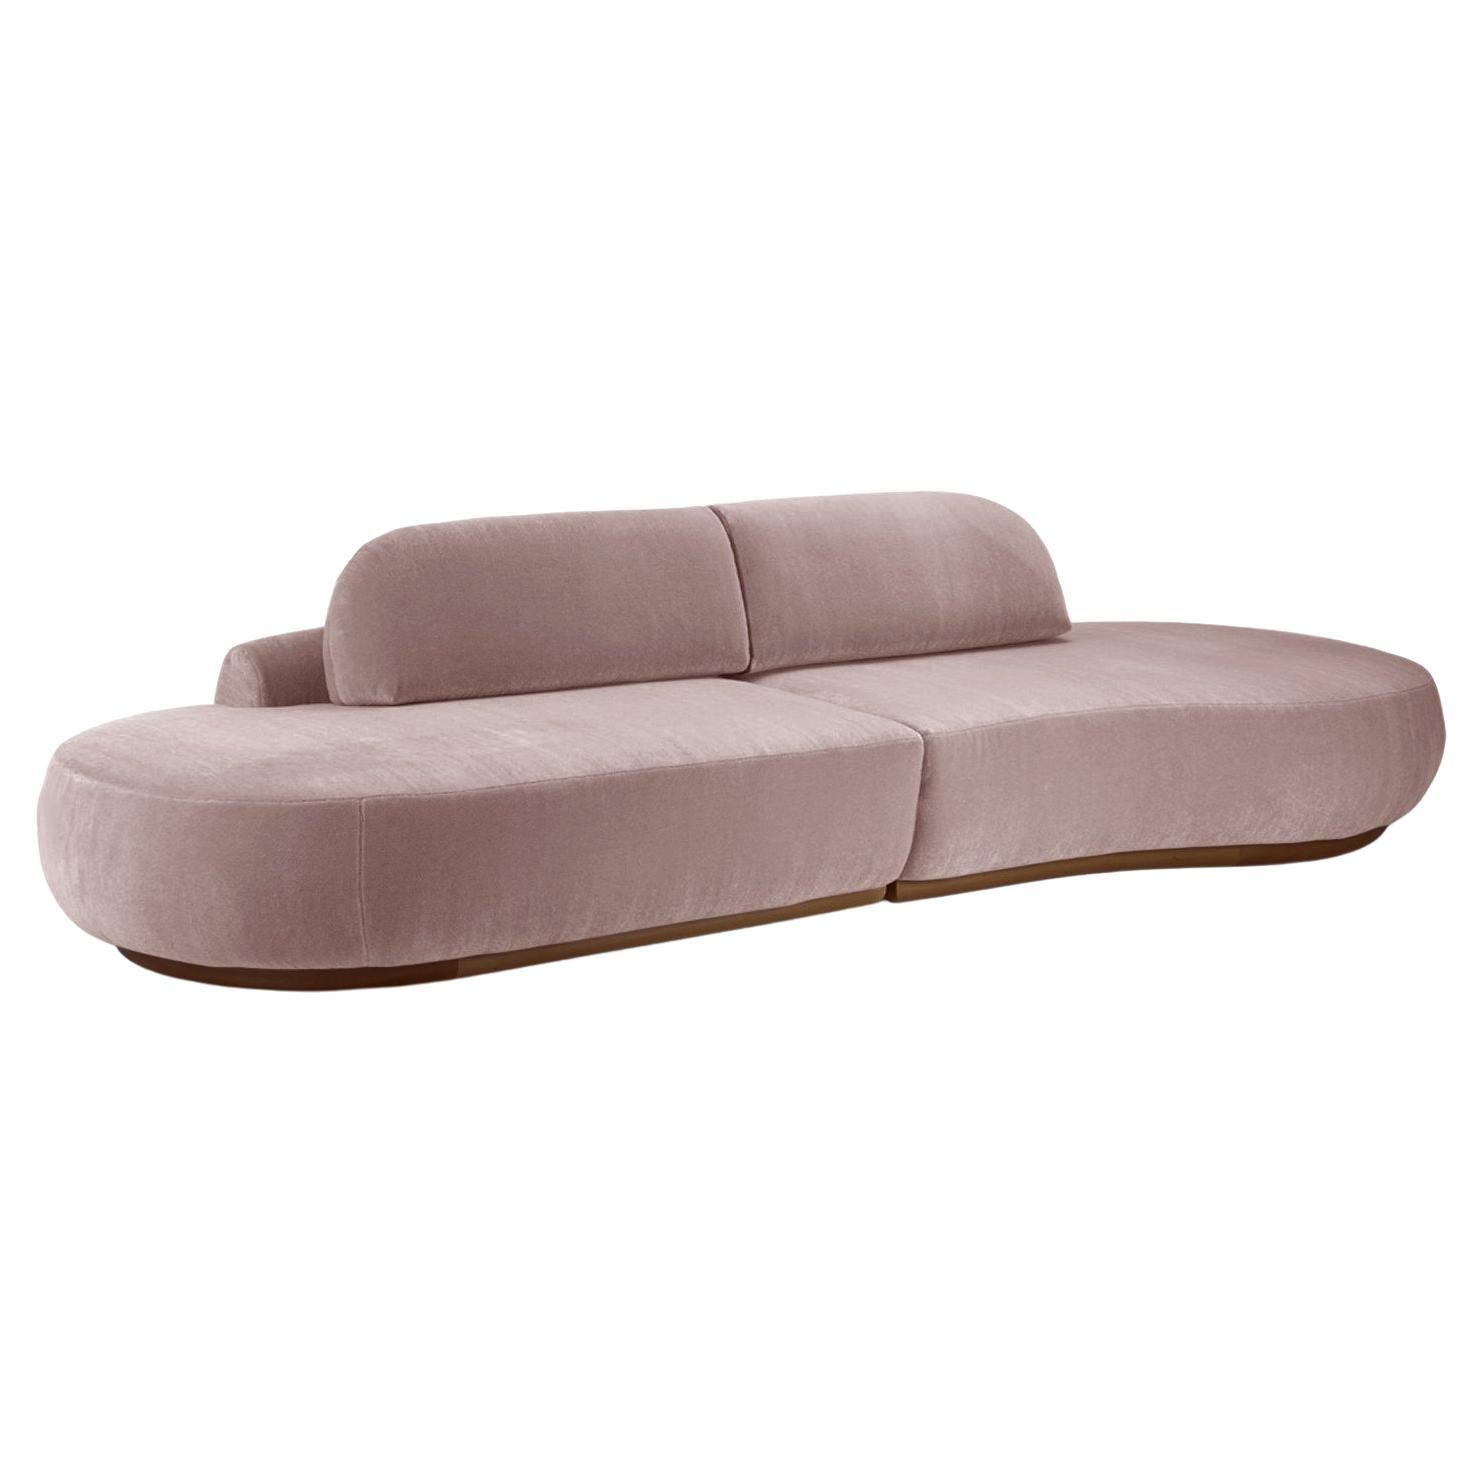 Naked Curved Sectional Sofa, 2 Piece with Beech Ash-056-1 and Barcelona Lotus For Sale